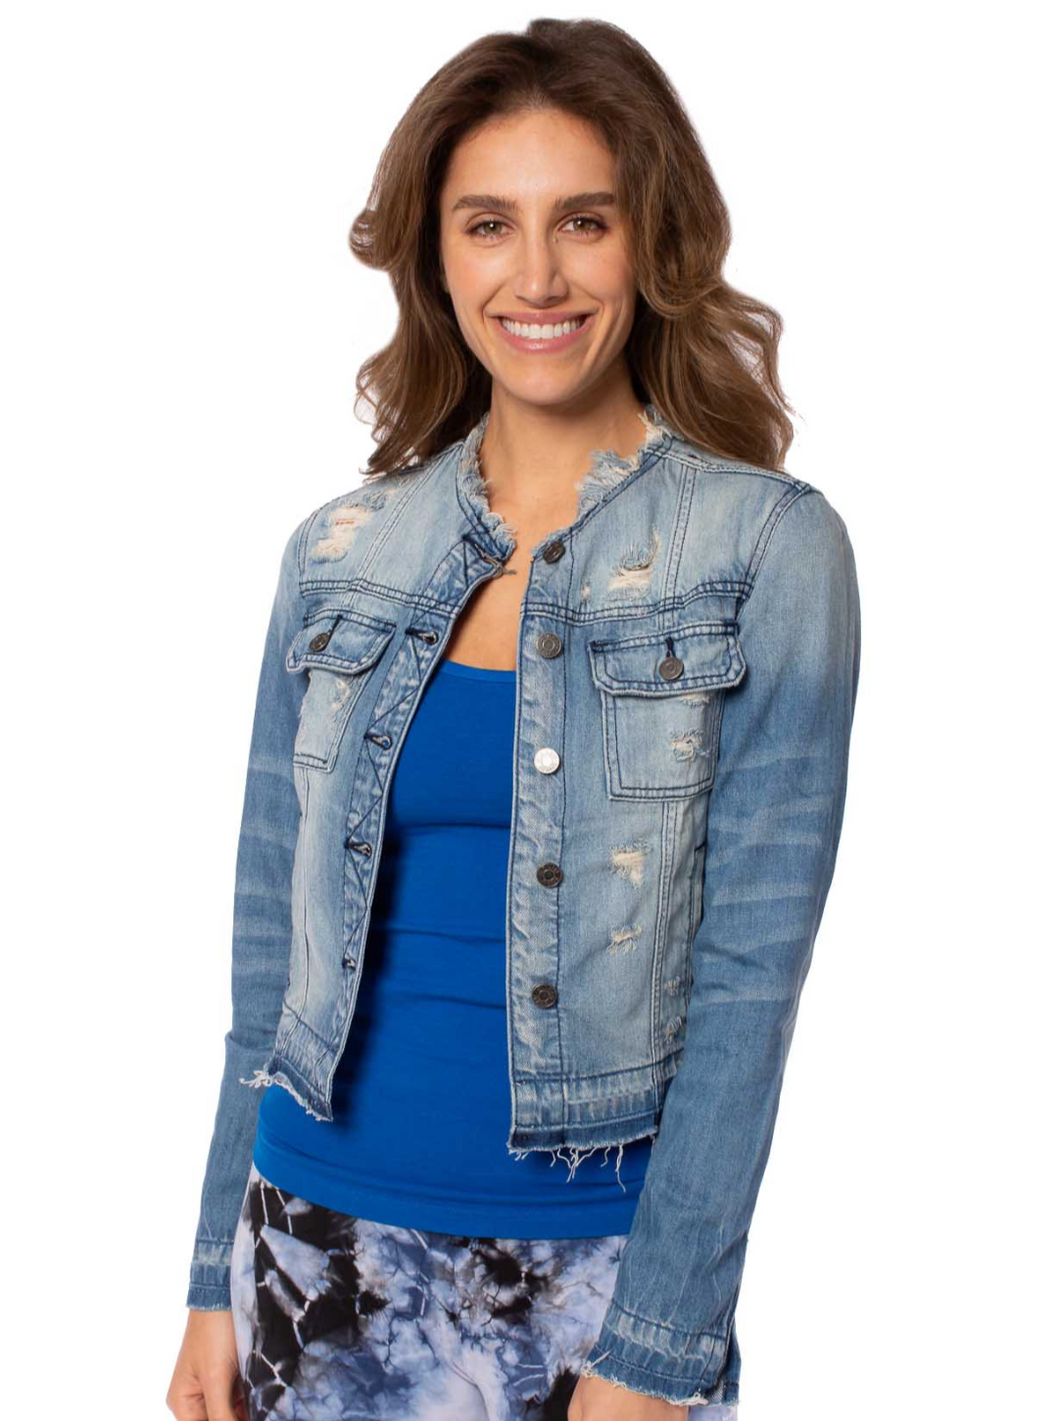 Collarless jean jacket 73% polyester, 27% rayon. Machine wash cold, tumble dry low. The model is 5 feet 9 inches tall, 135 lbs, and is wearing a size small.